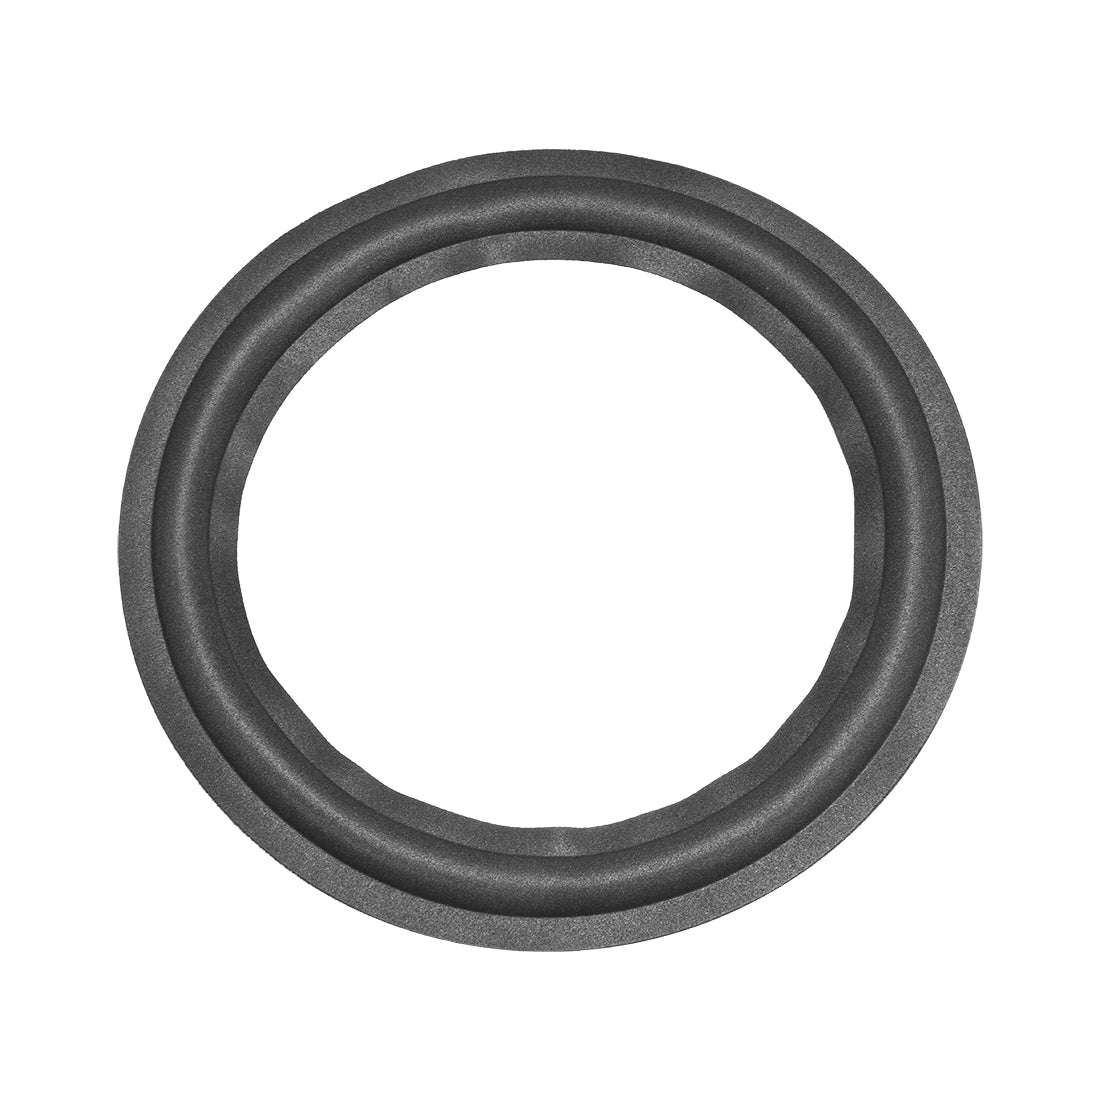 uxcell Uxcell 10" 10 Inch Speaker Foam Edge Surround Rings Replacement Parts for Speaker Repair or DIY